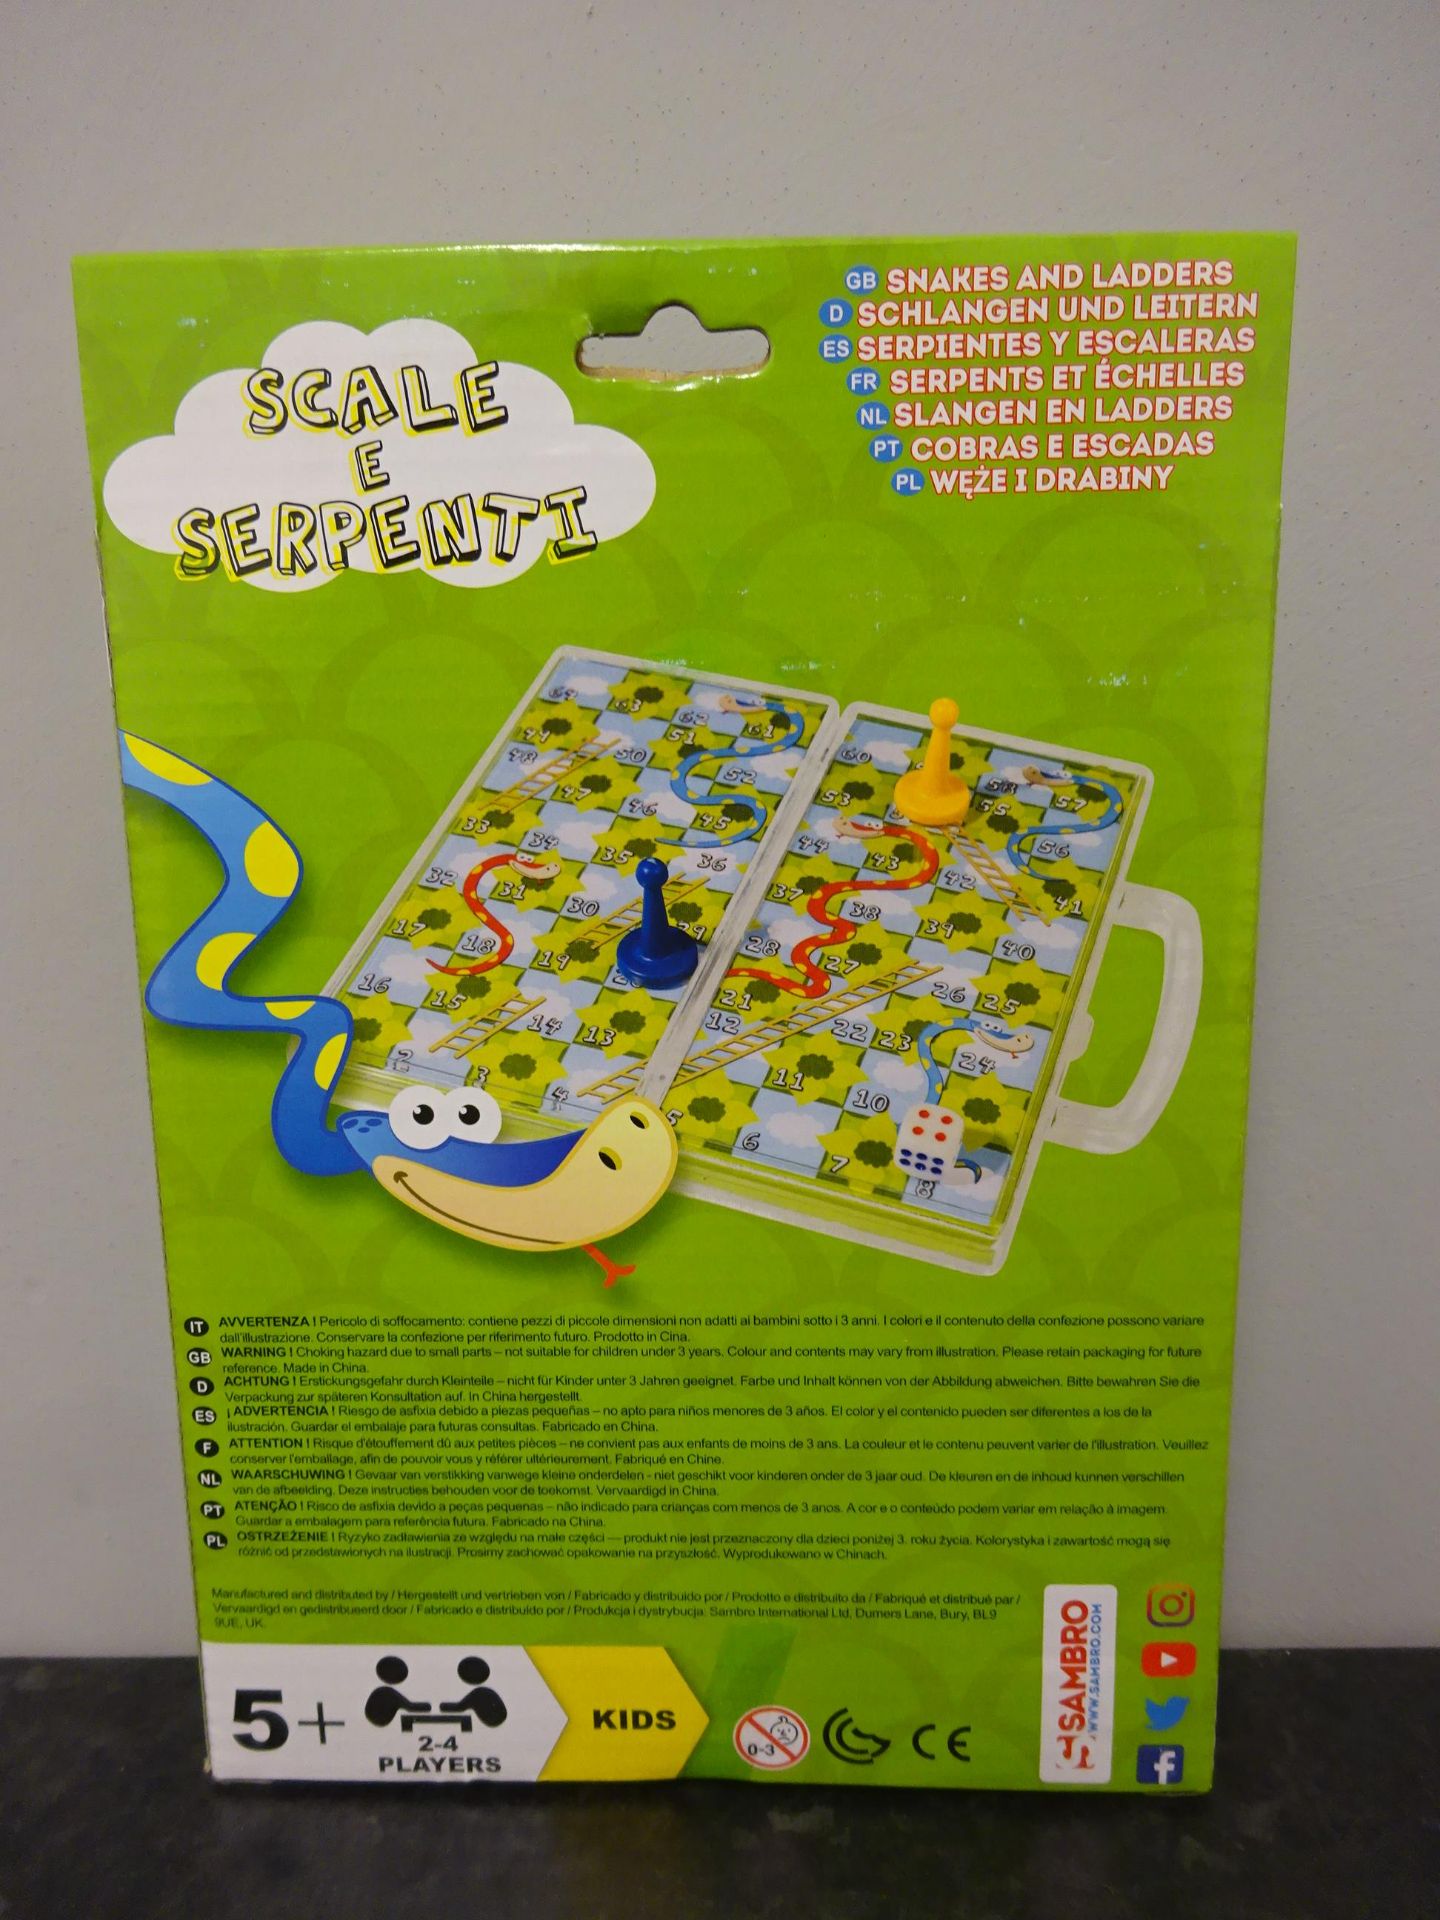 New Scale E Serpenti Travel Boardgame (snakes & Ladders) - Image 2 of 2